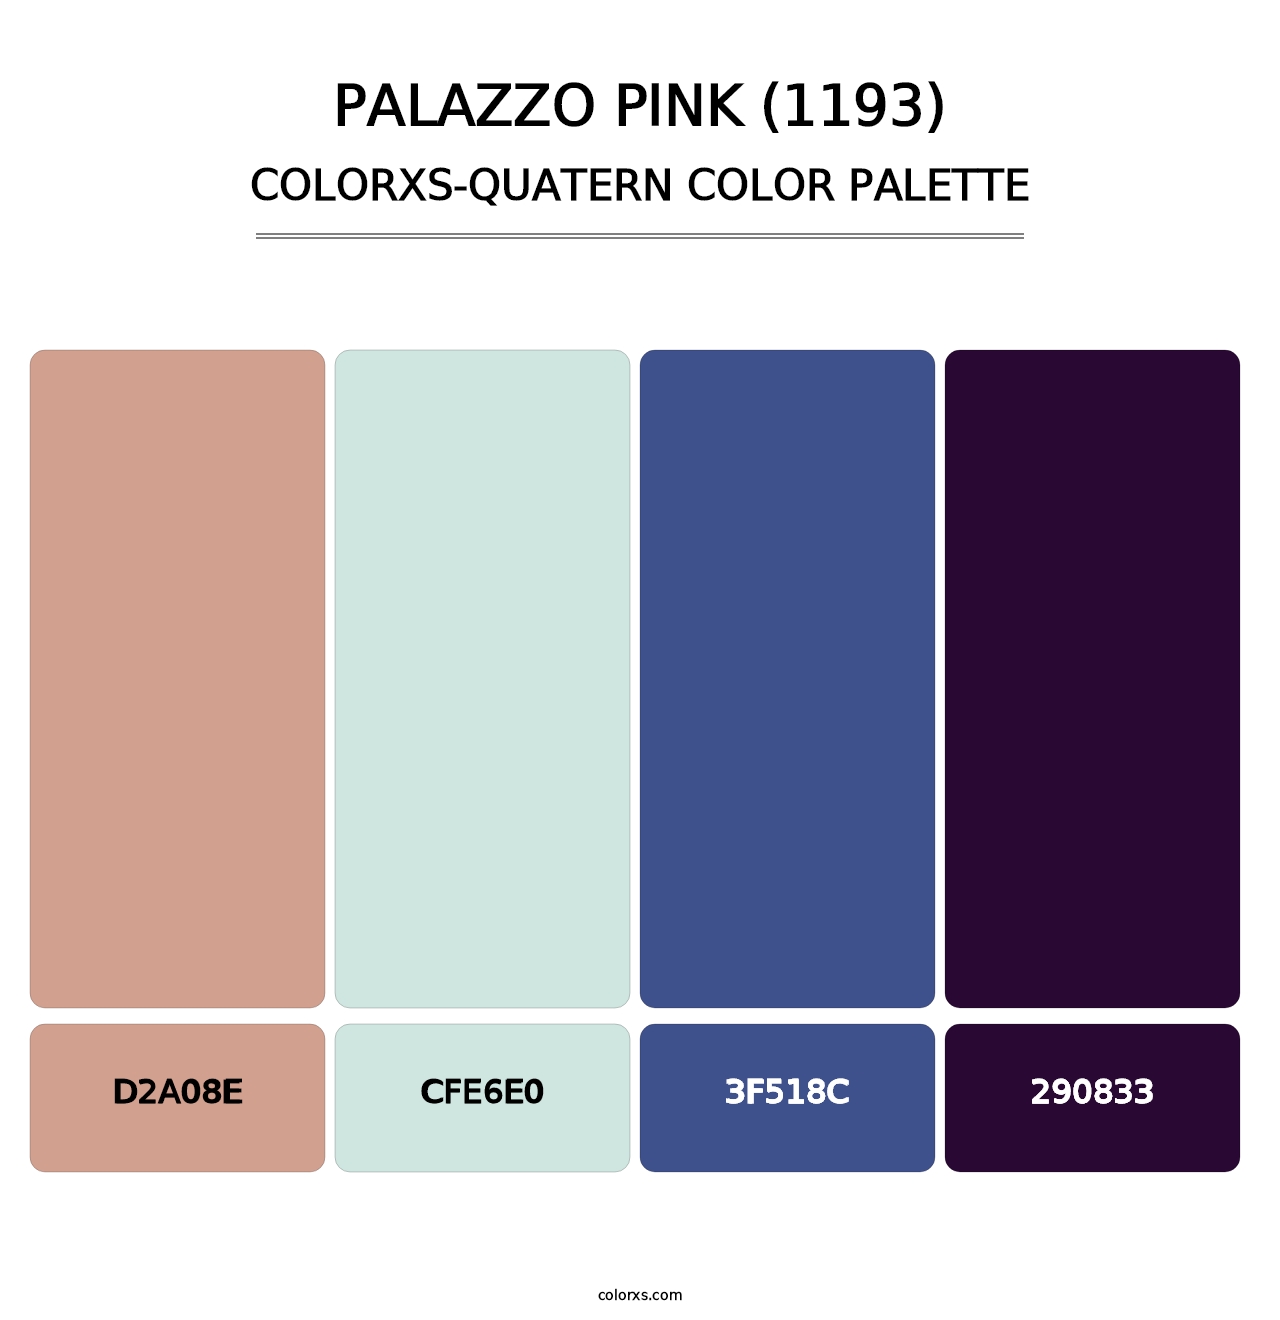 Palazzo Pink (1193) - Colorxs Quatern Palette